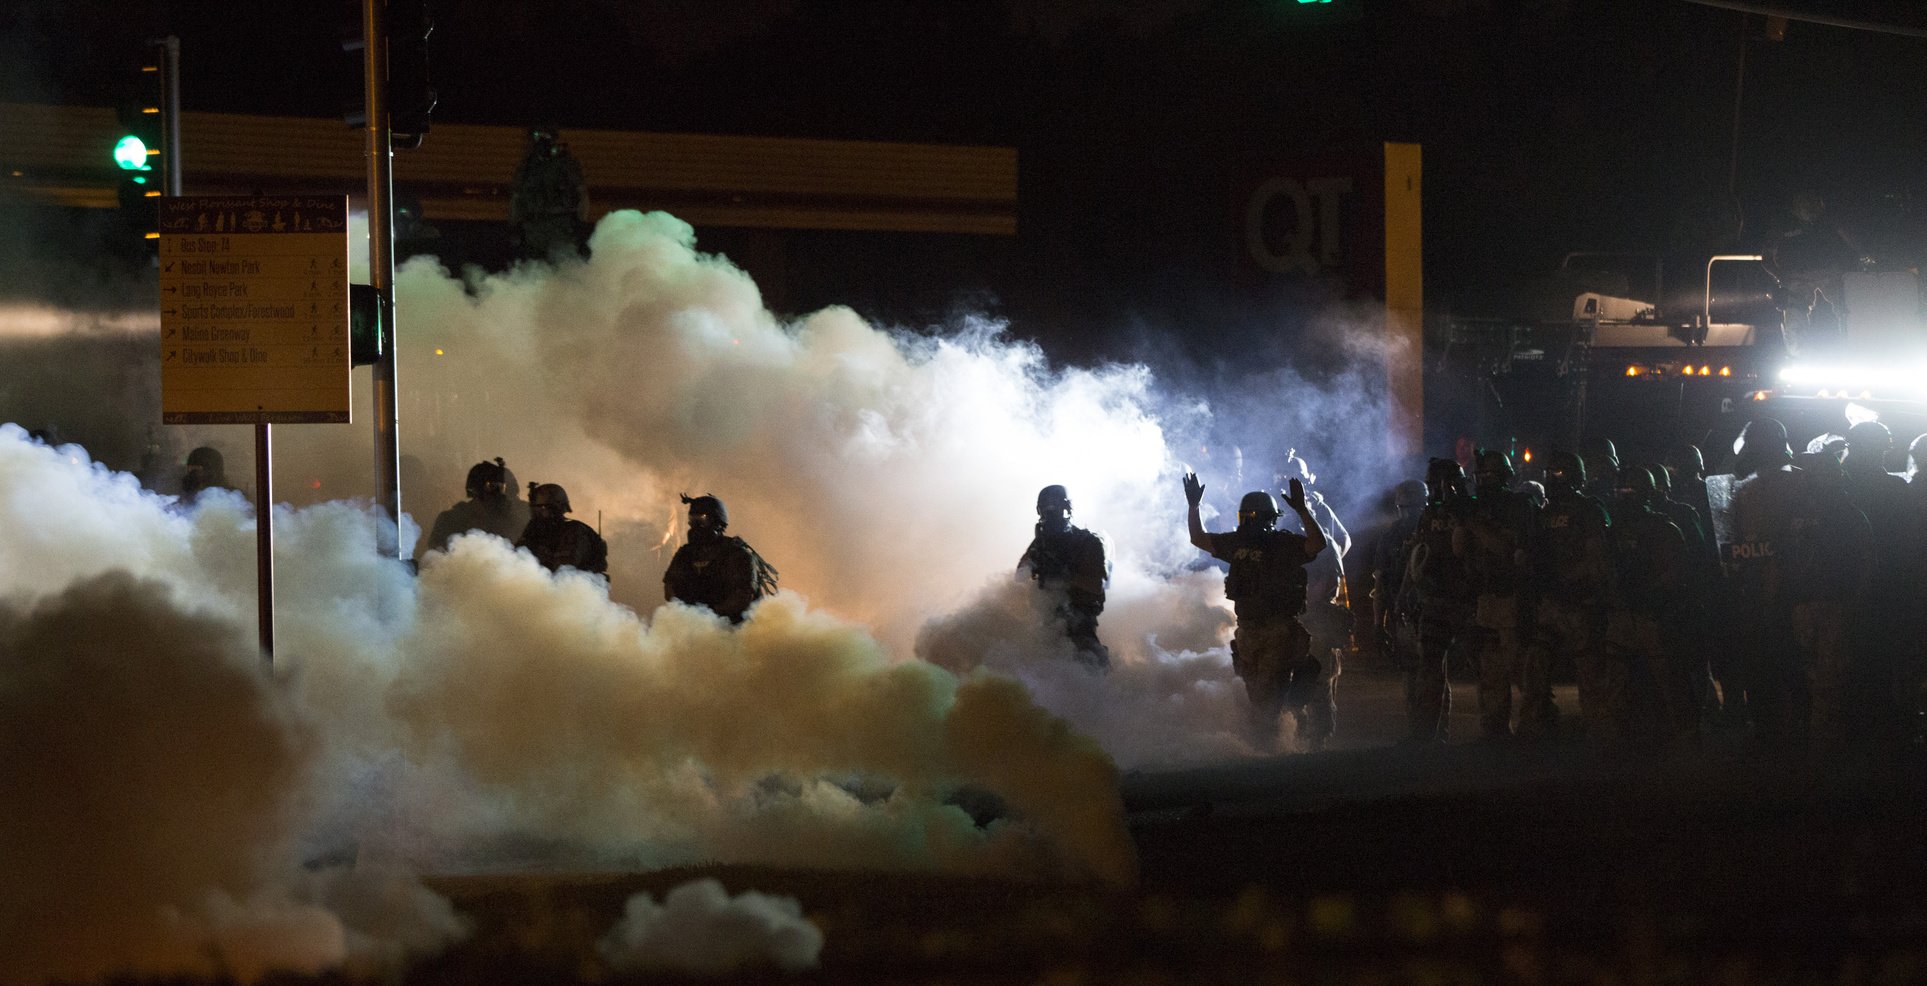 Riot police clear a street with smoke bombs while clashing with demonstrators in Ferguson, Missouri; riots in the united states